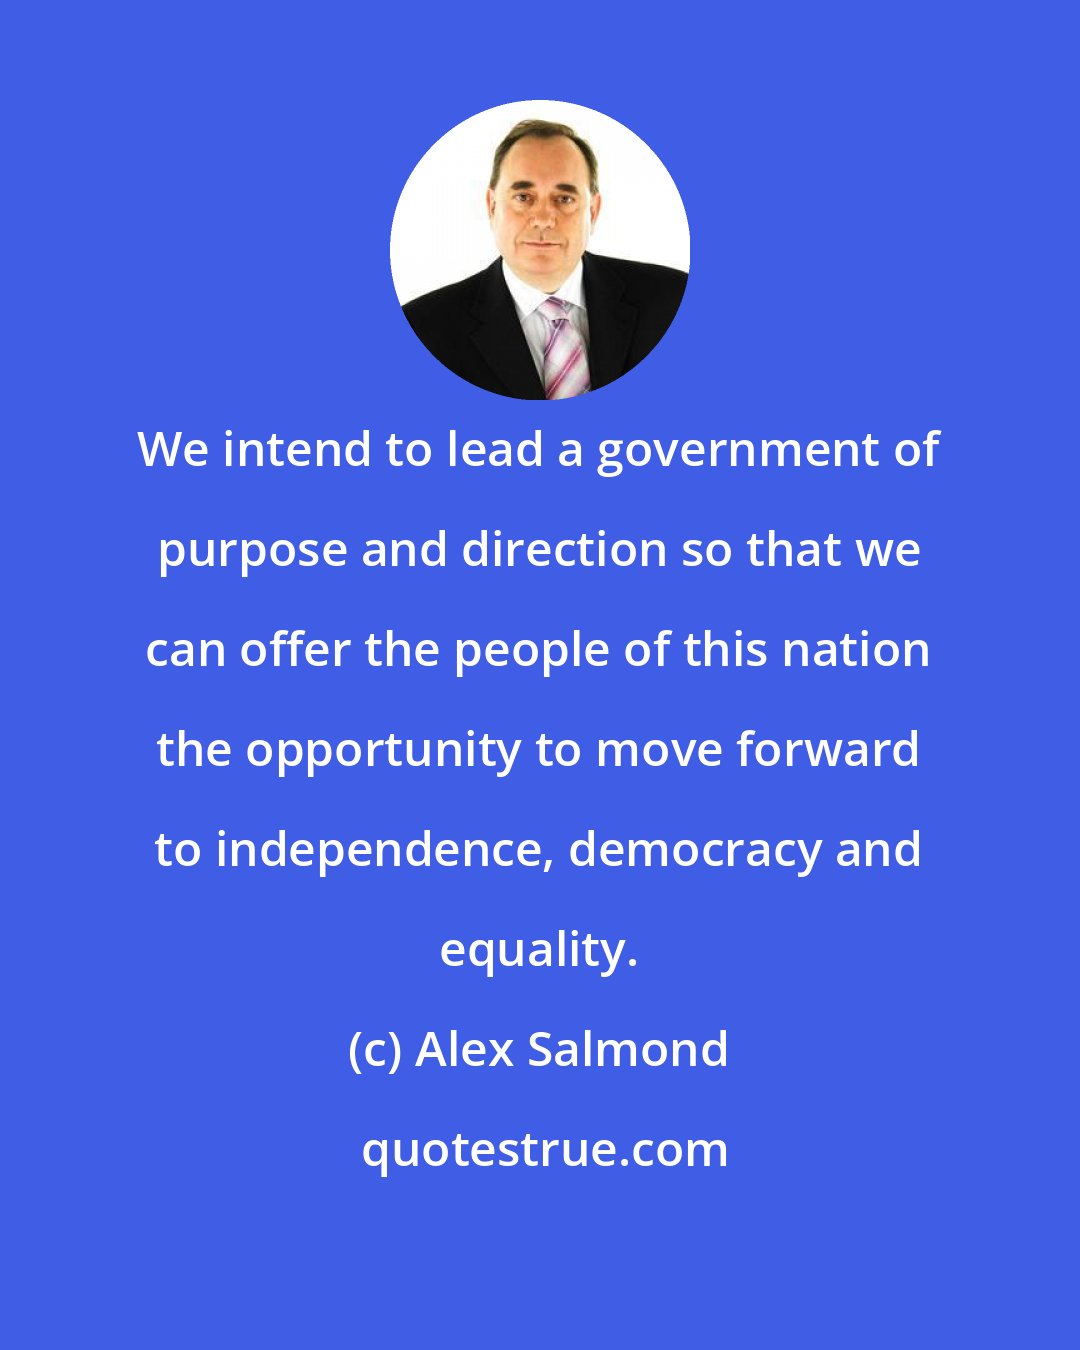 Alex Salmond: We intend to lead a government of purpose and direction so that we can offer the people of this nation the opportunity to move forward to independence, democracy and equality.